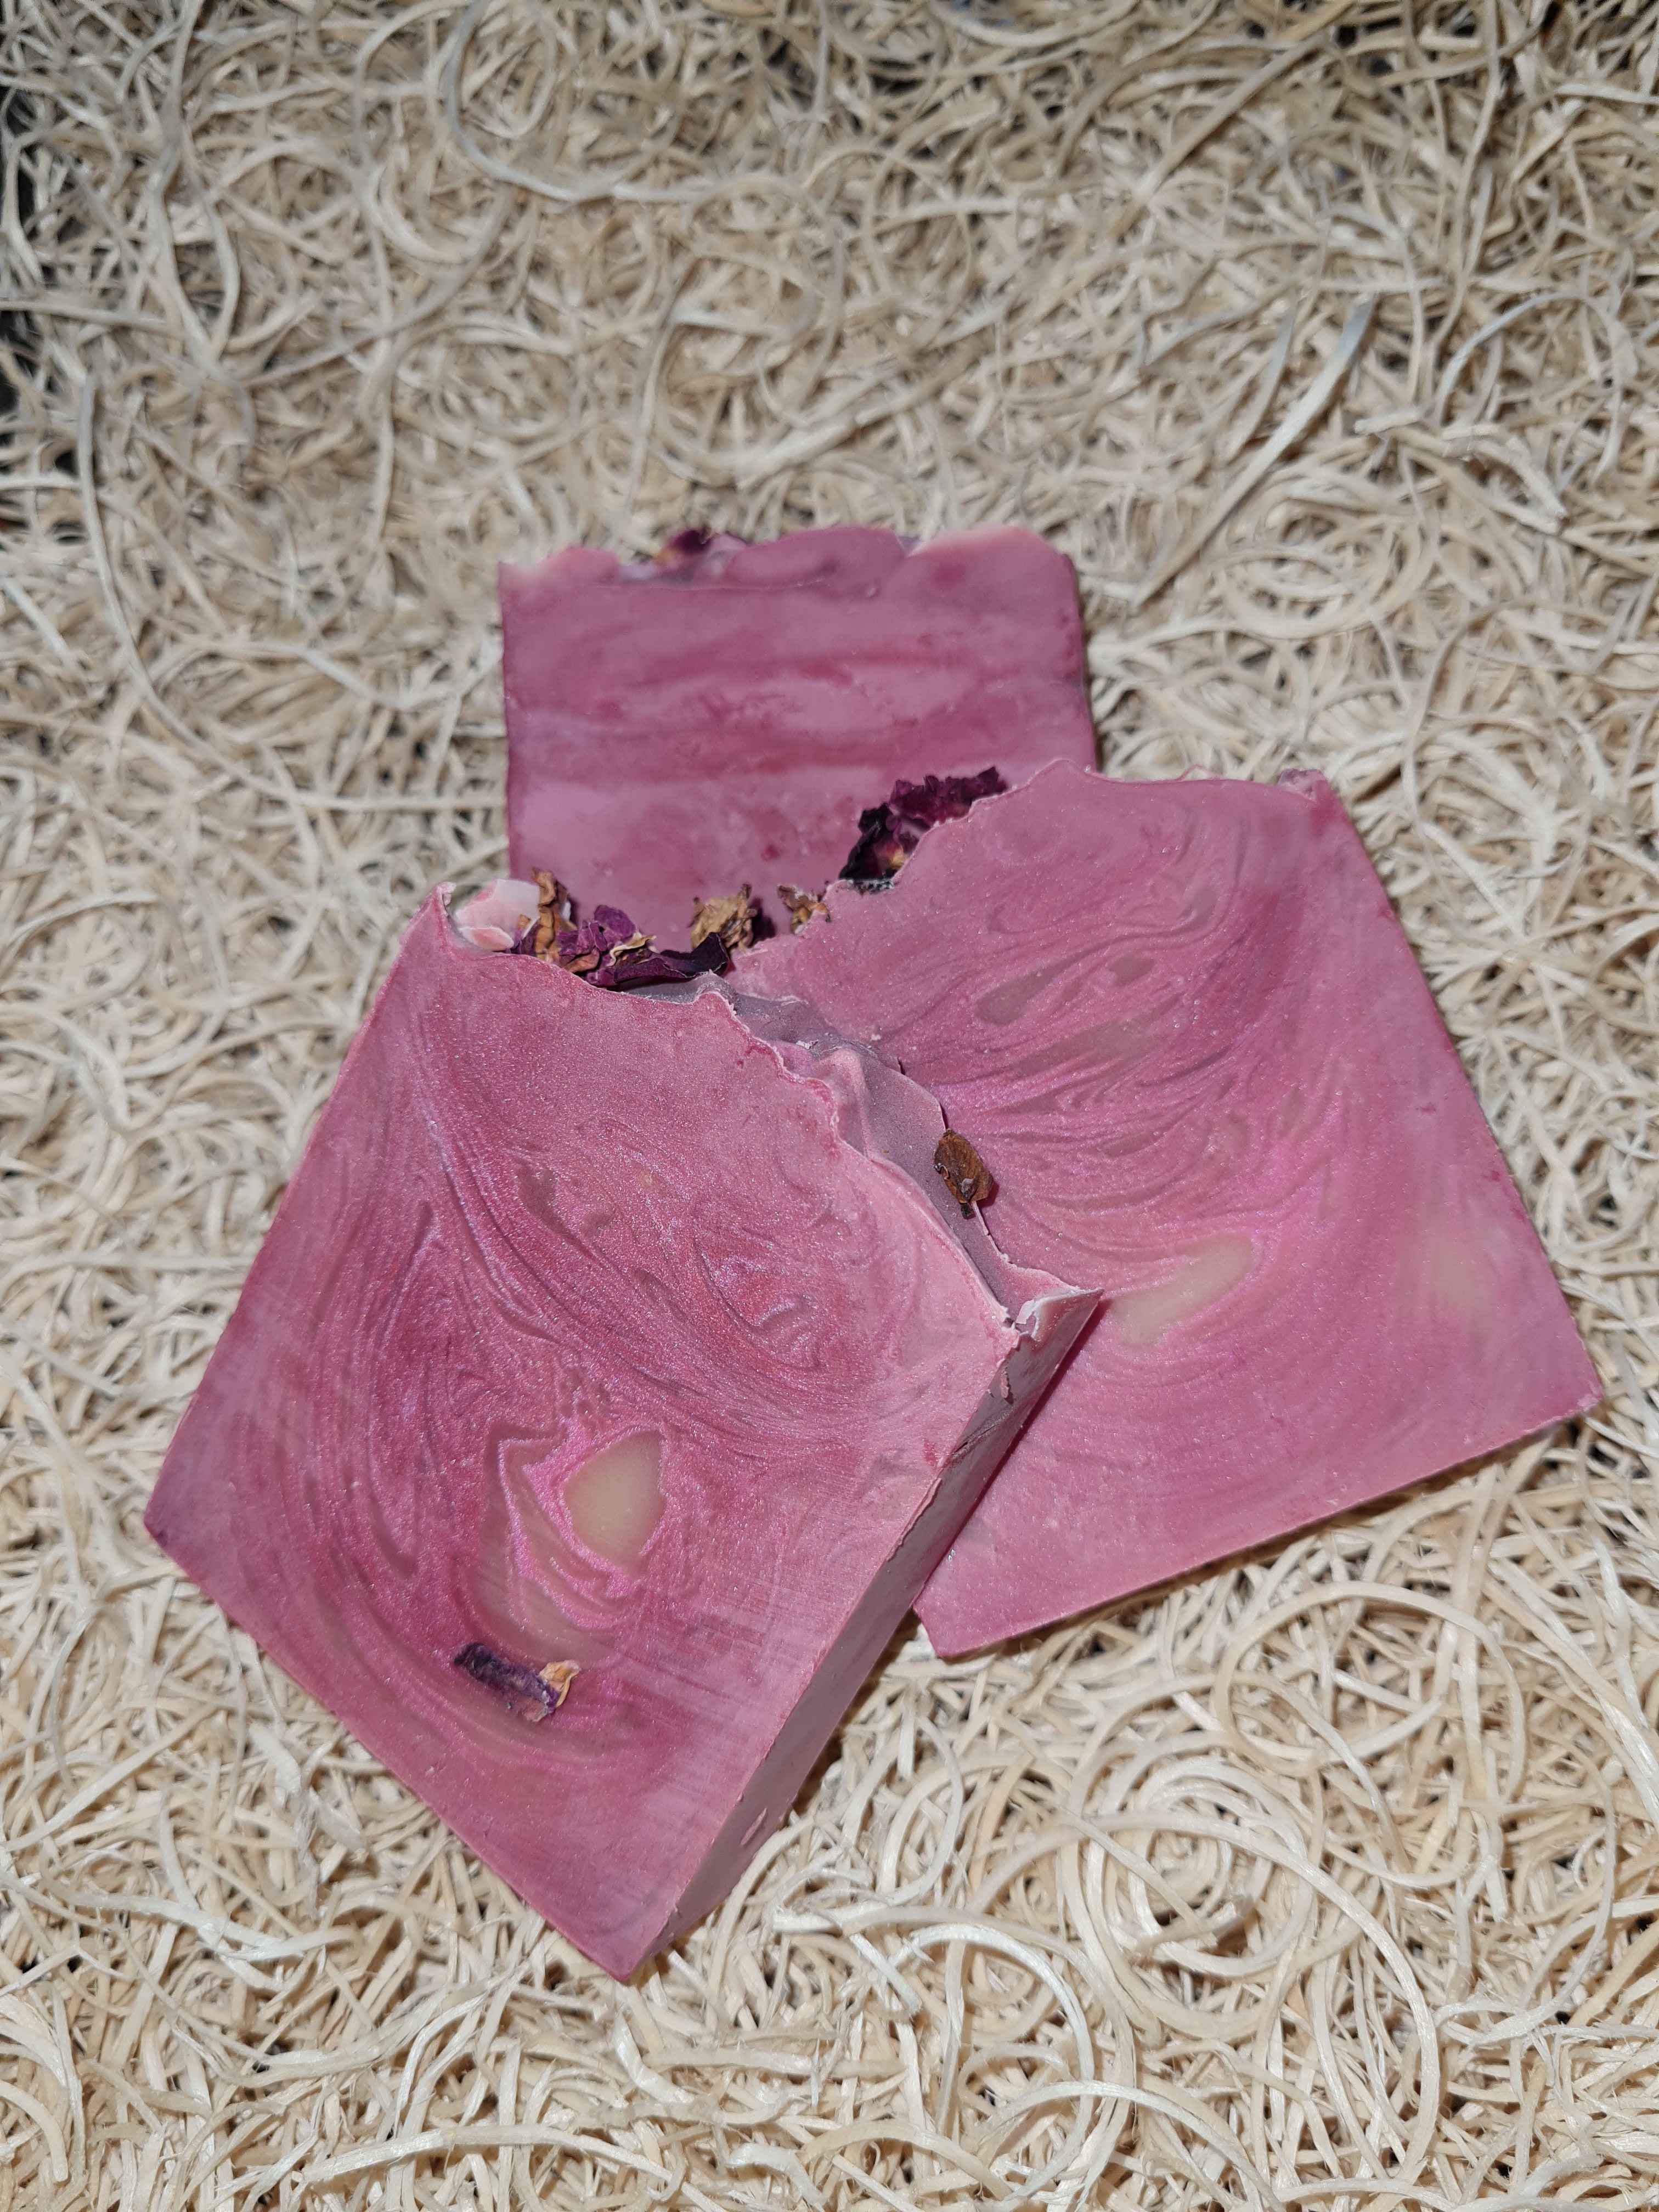 Goat's milk soap with Rose essential oil and Beeswax 